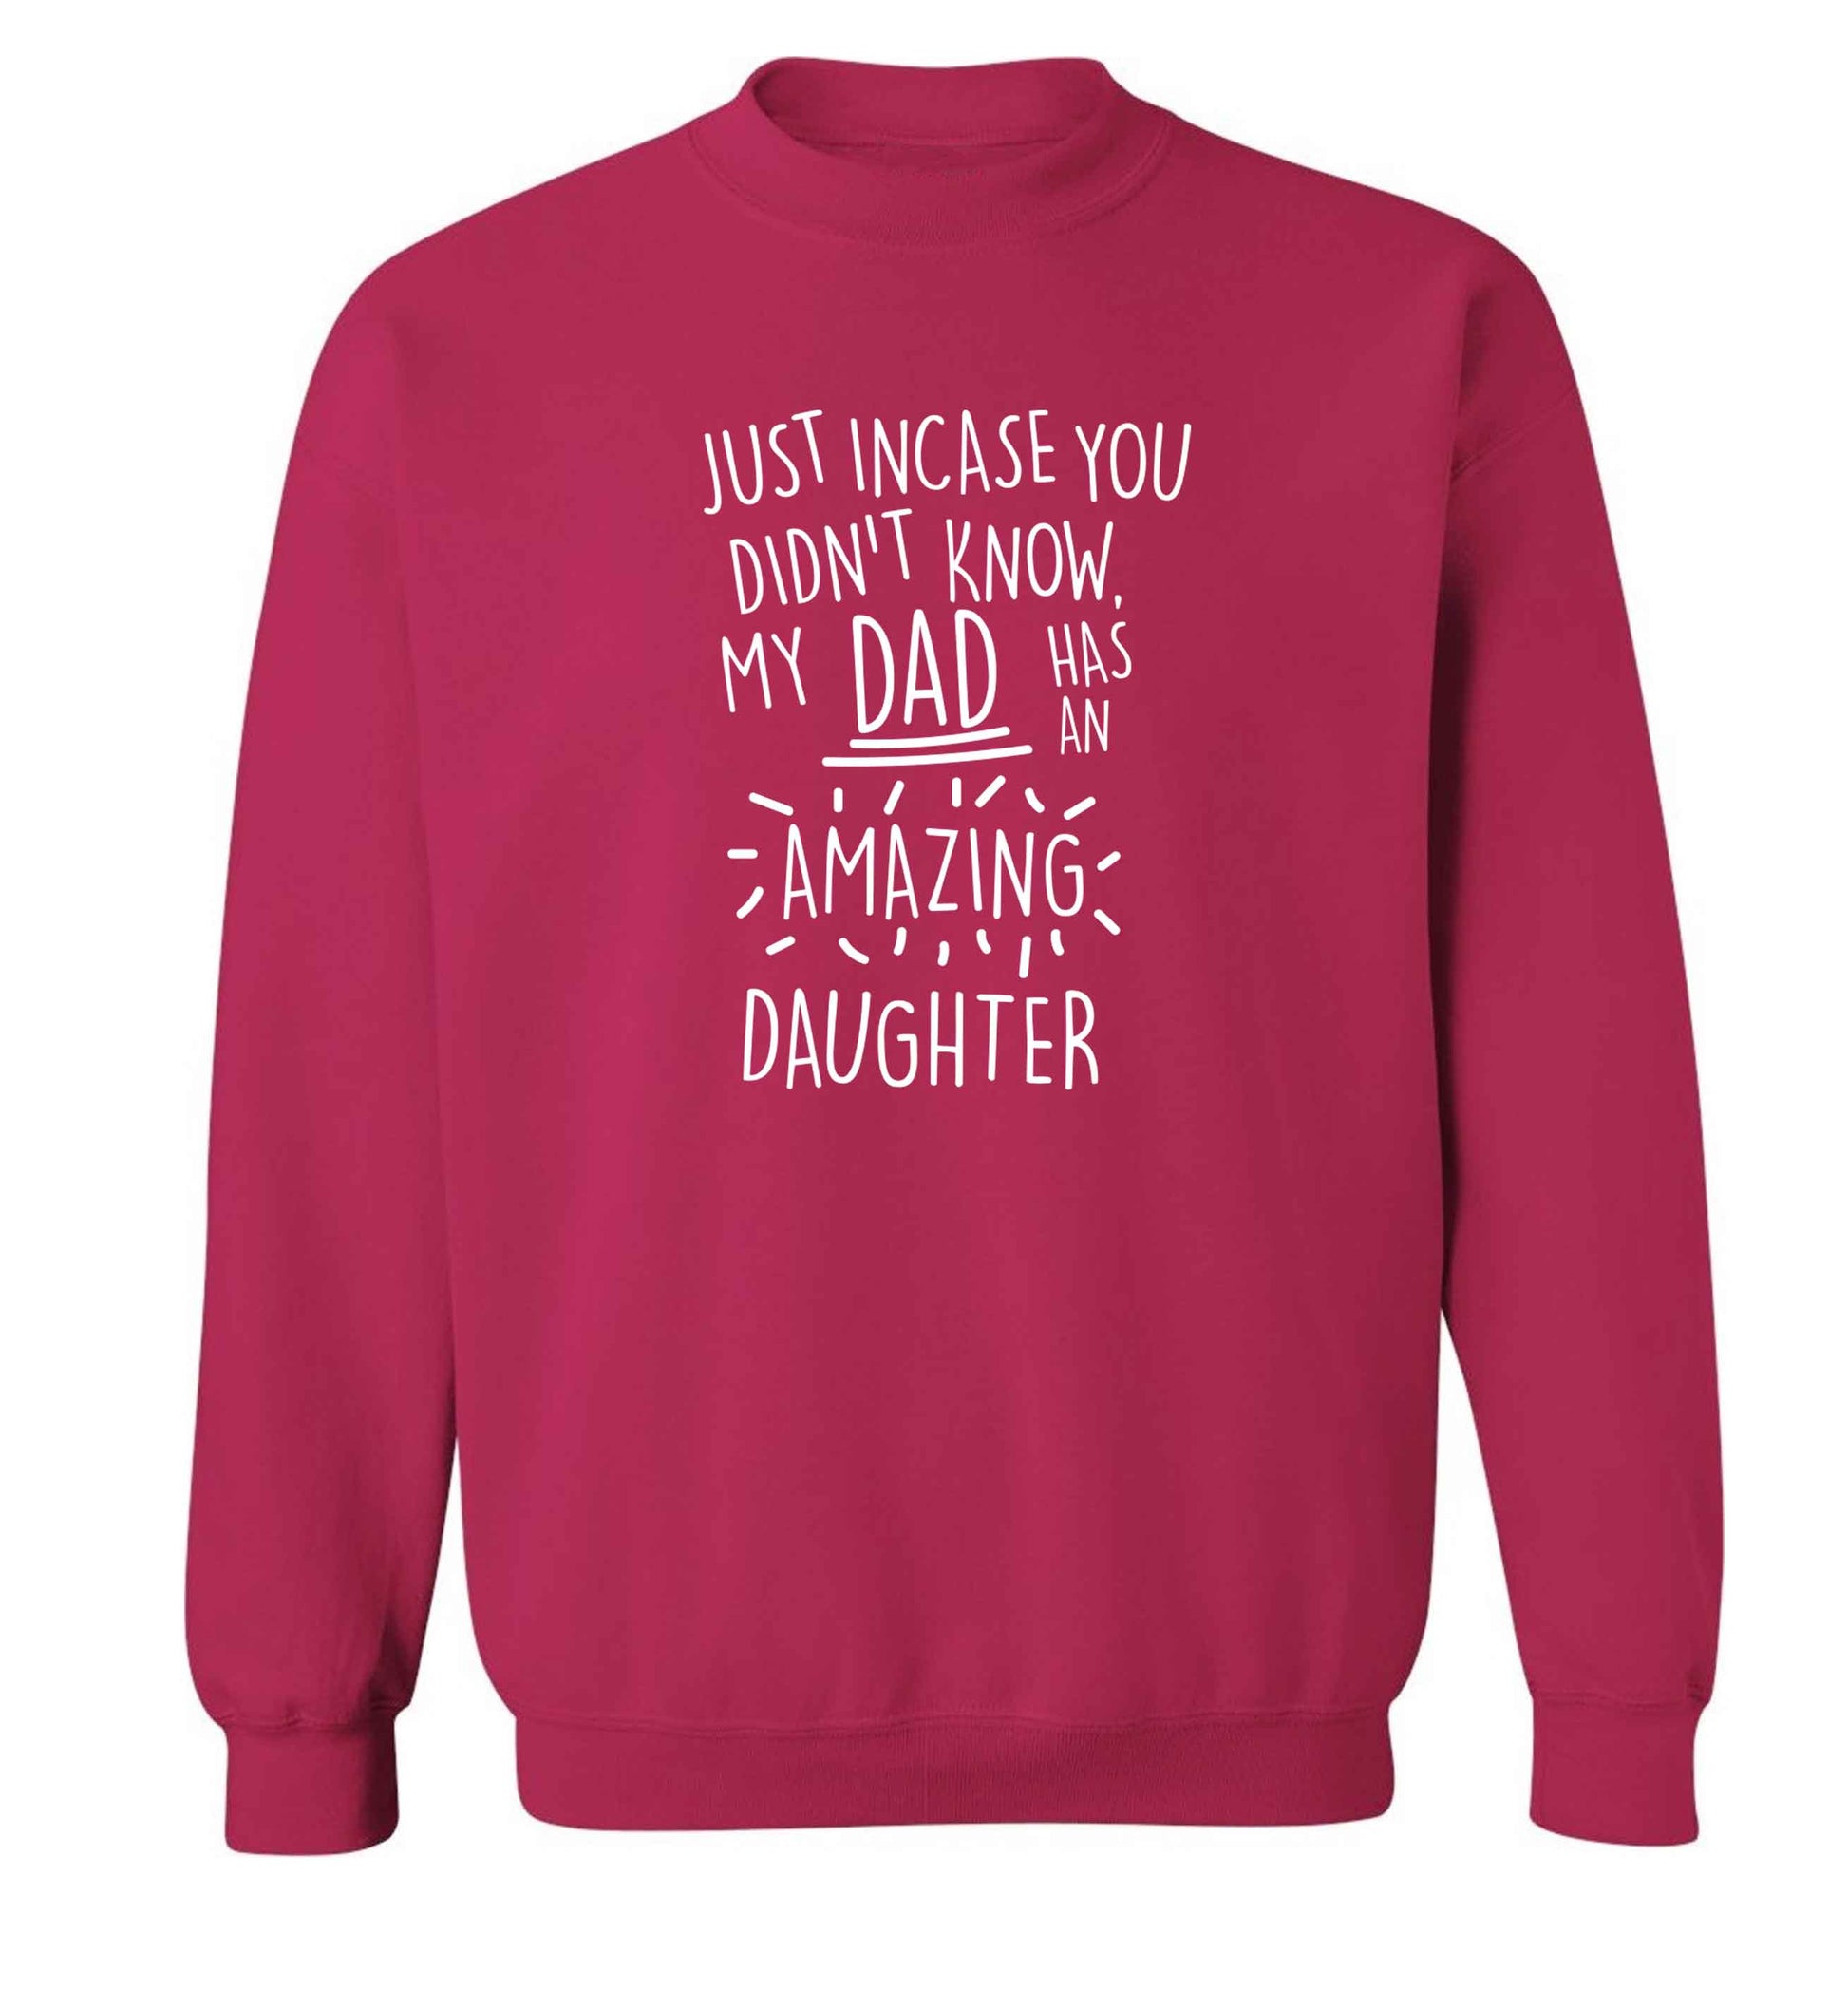 Just incase you didn't know my dad has an amazing daughter adult's unisex pink sweater 2XL